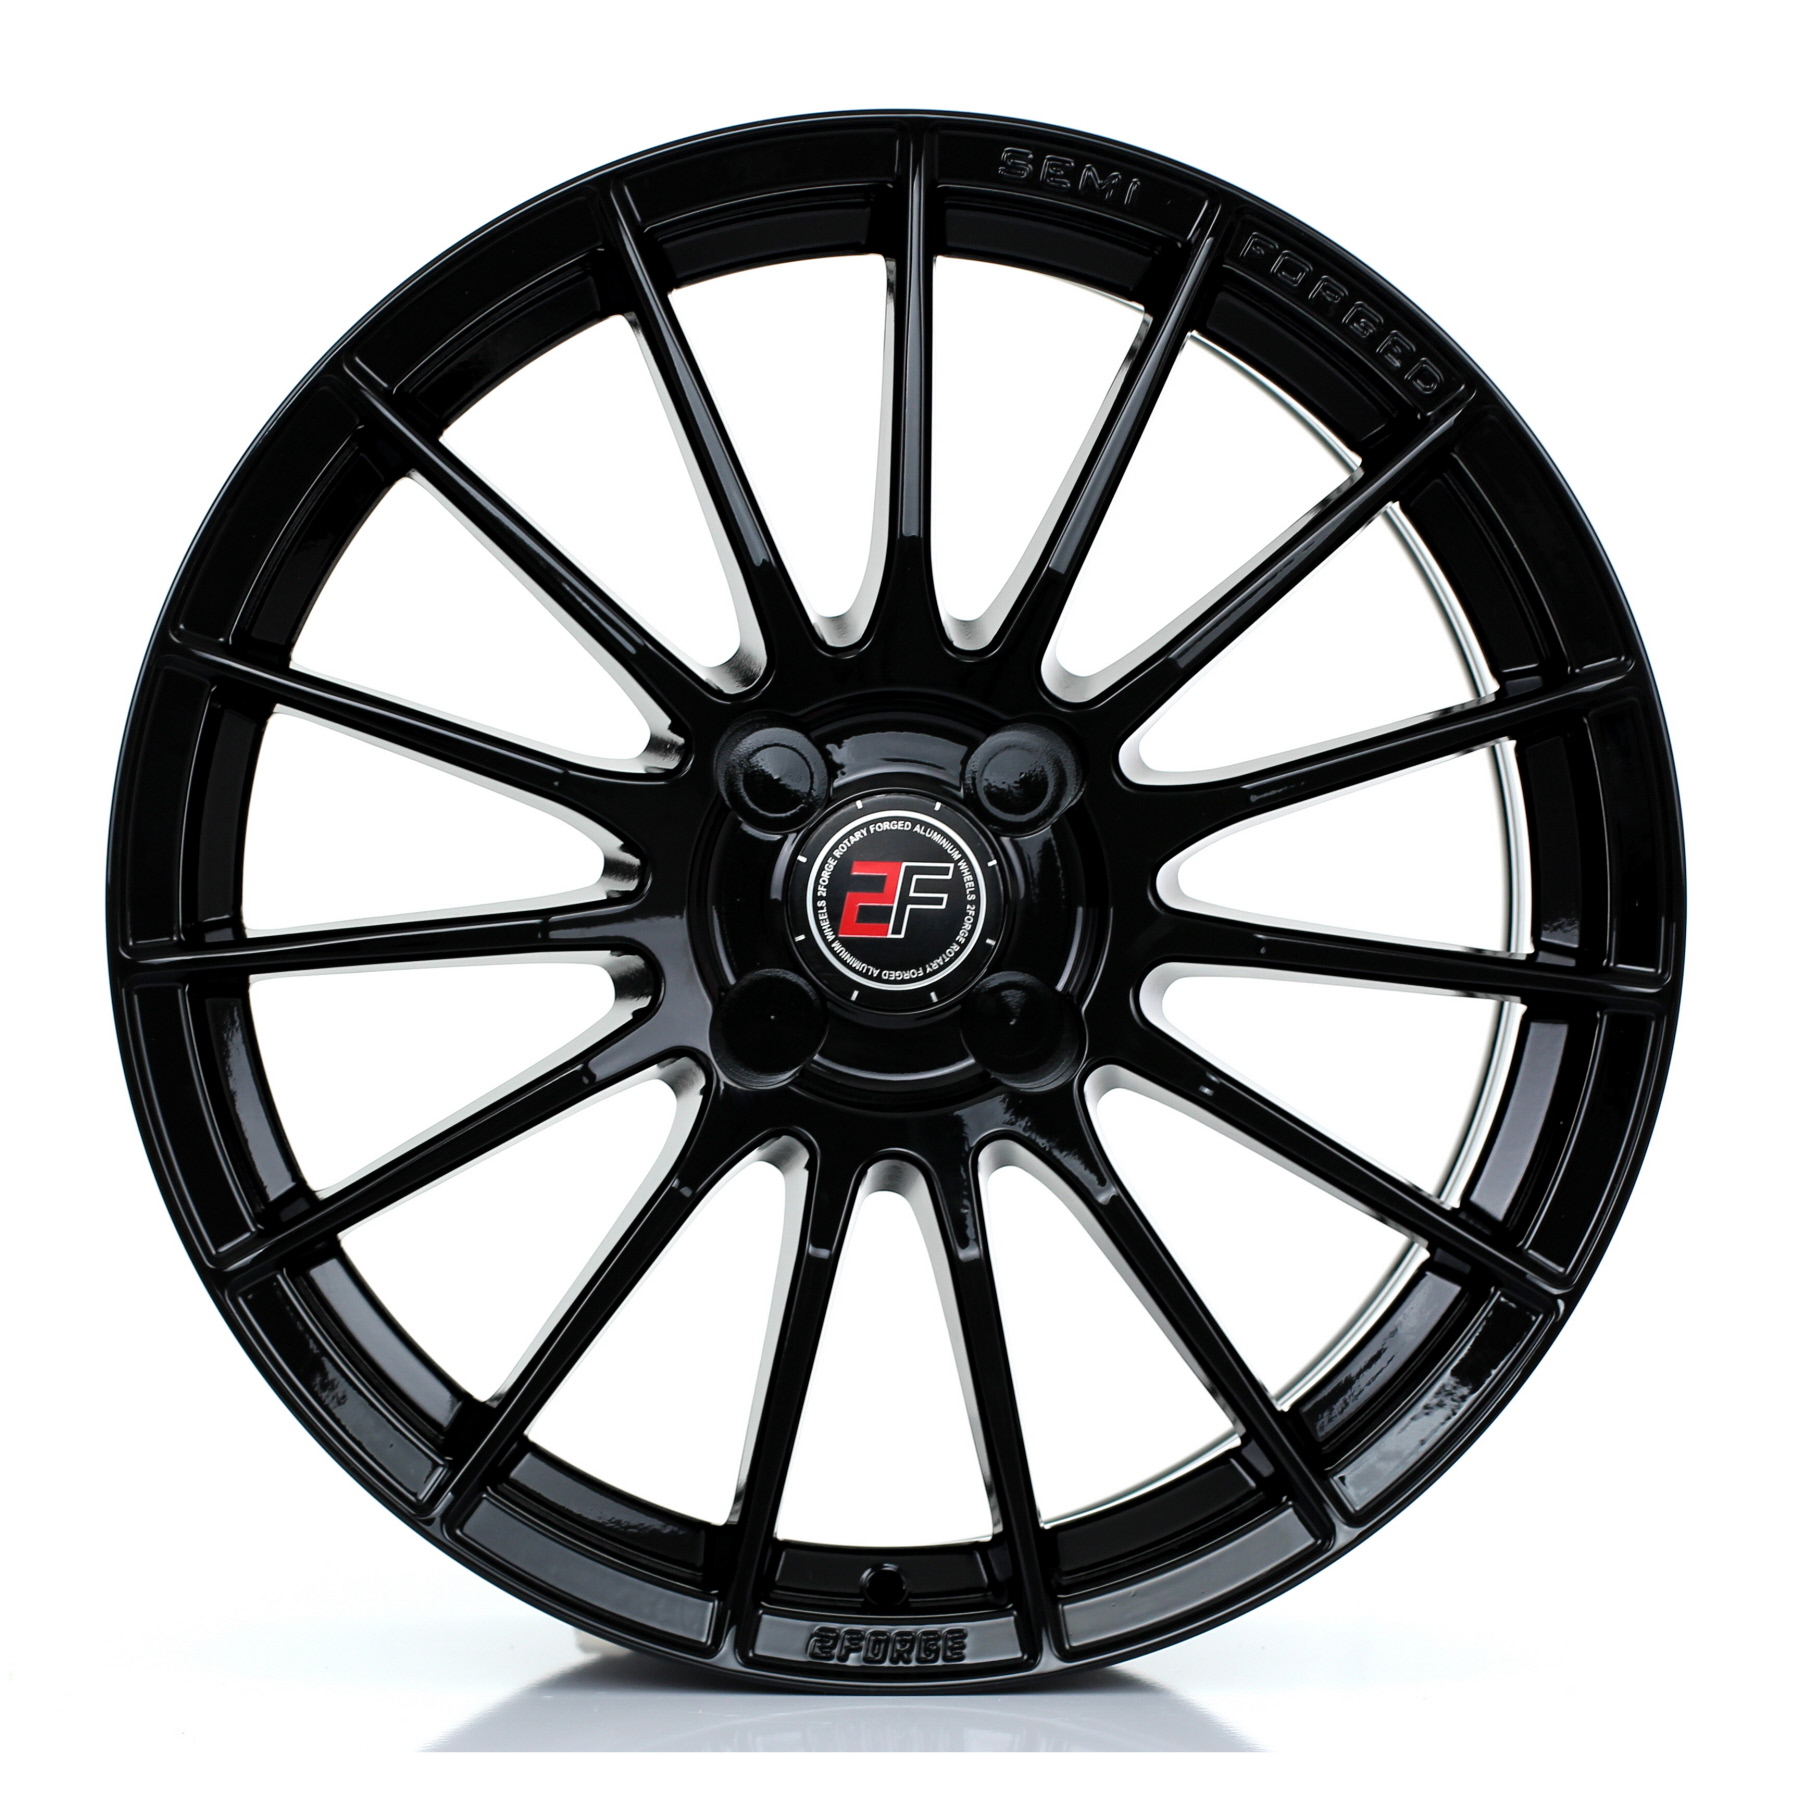 17 Inch 2FORGE ZF1 Gloss Black Alloy Wheels